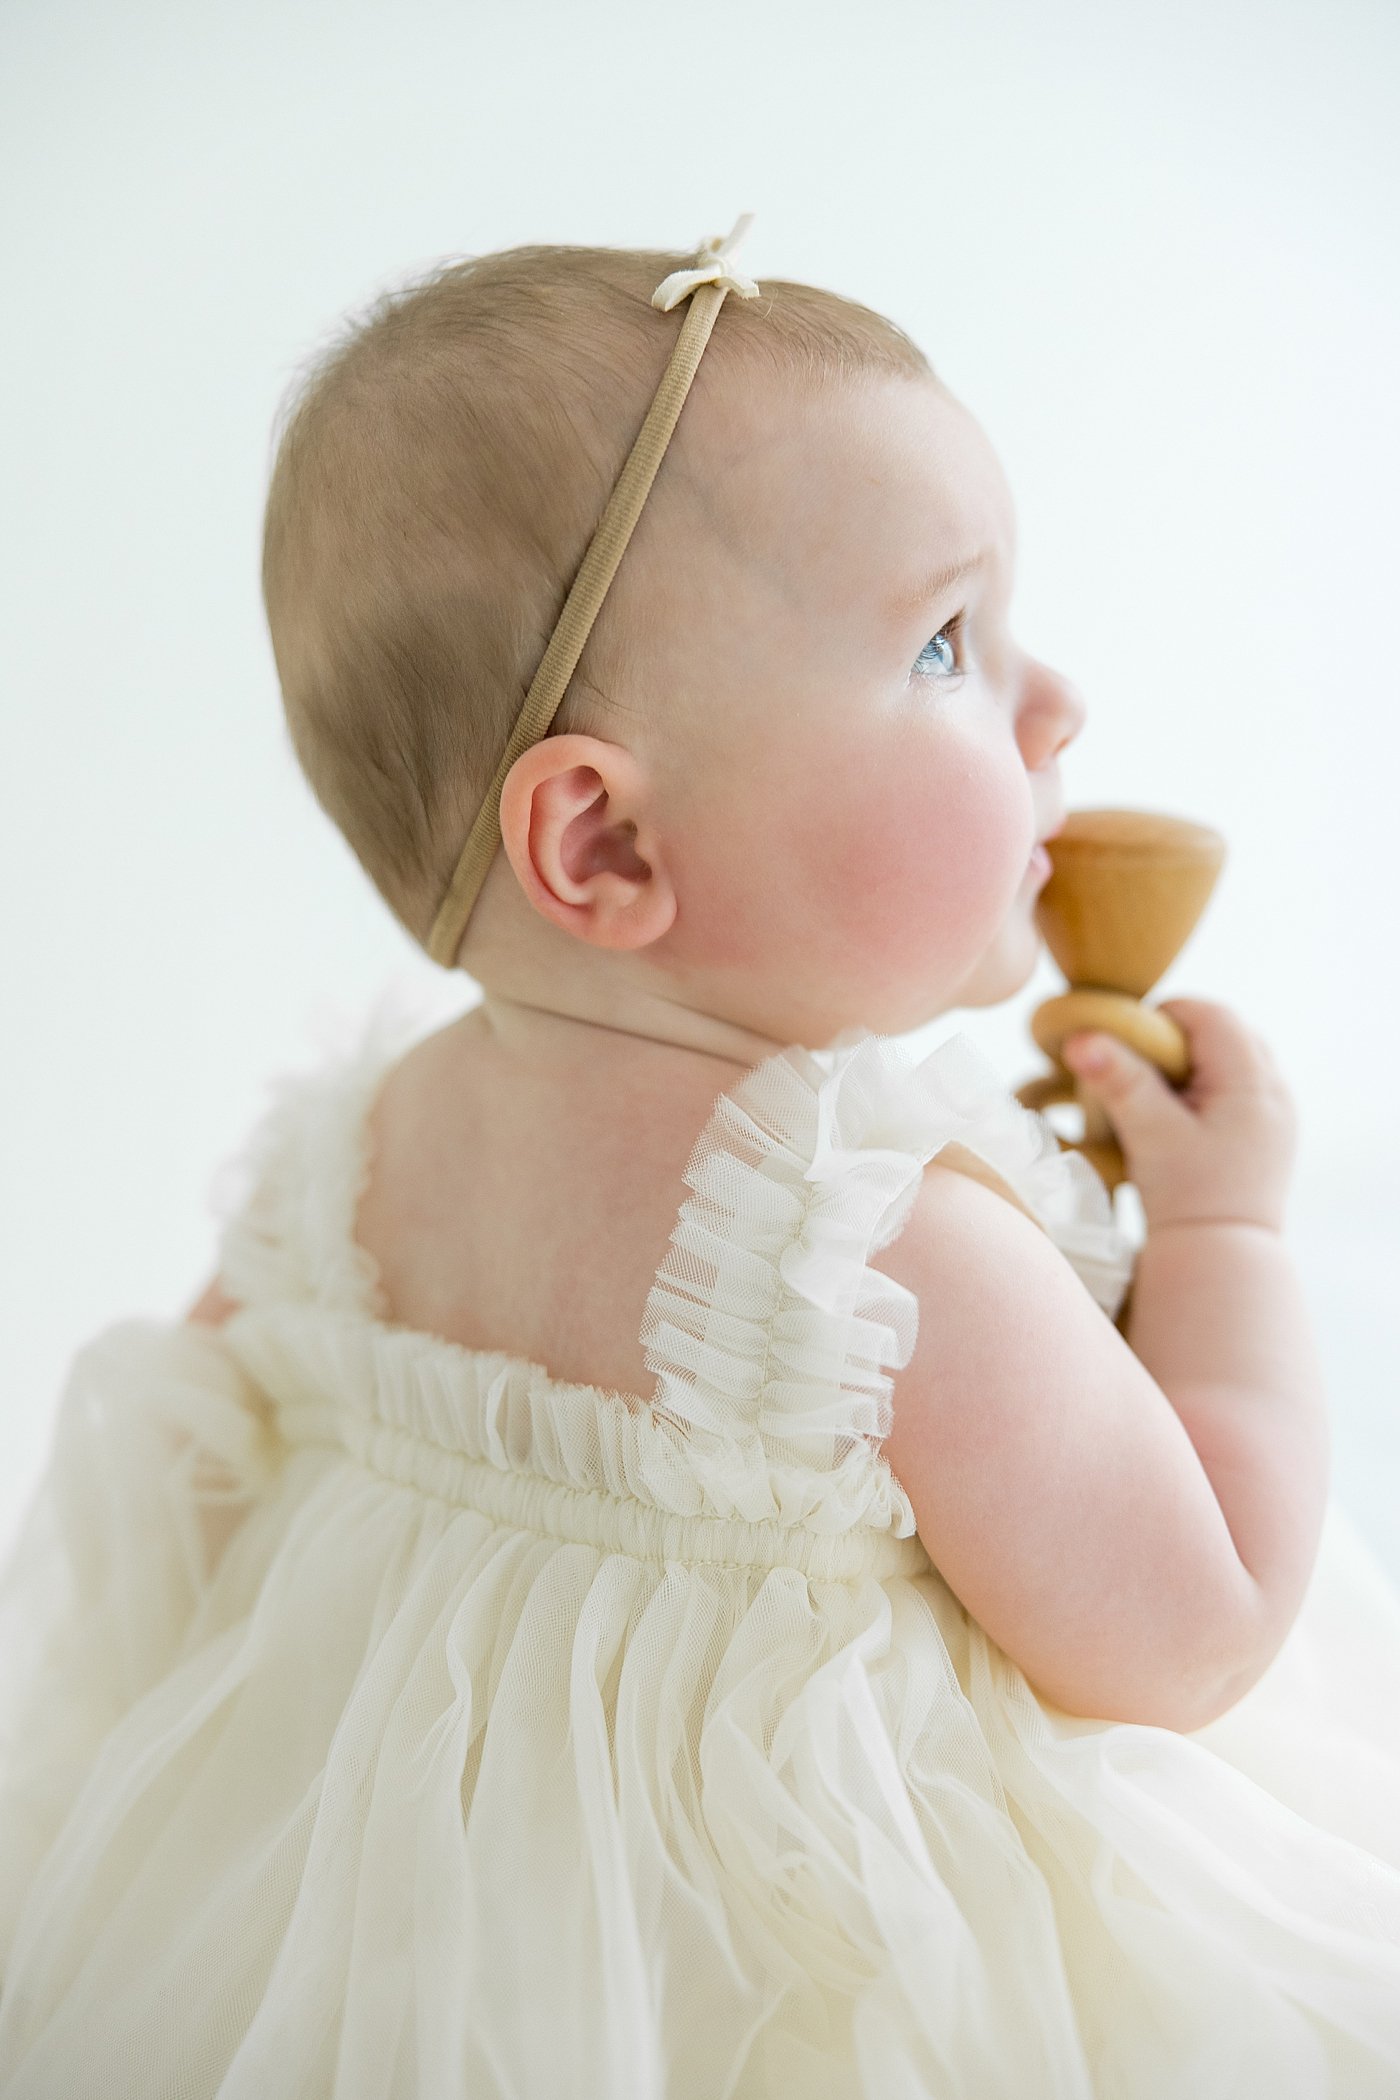 Baby Girl Portraits in Newport Beach with Ambre Williams Photography